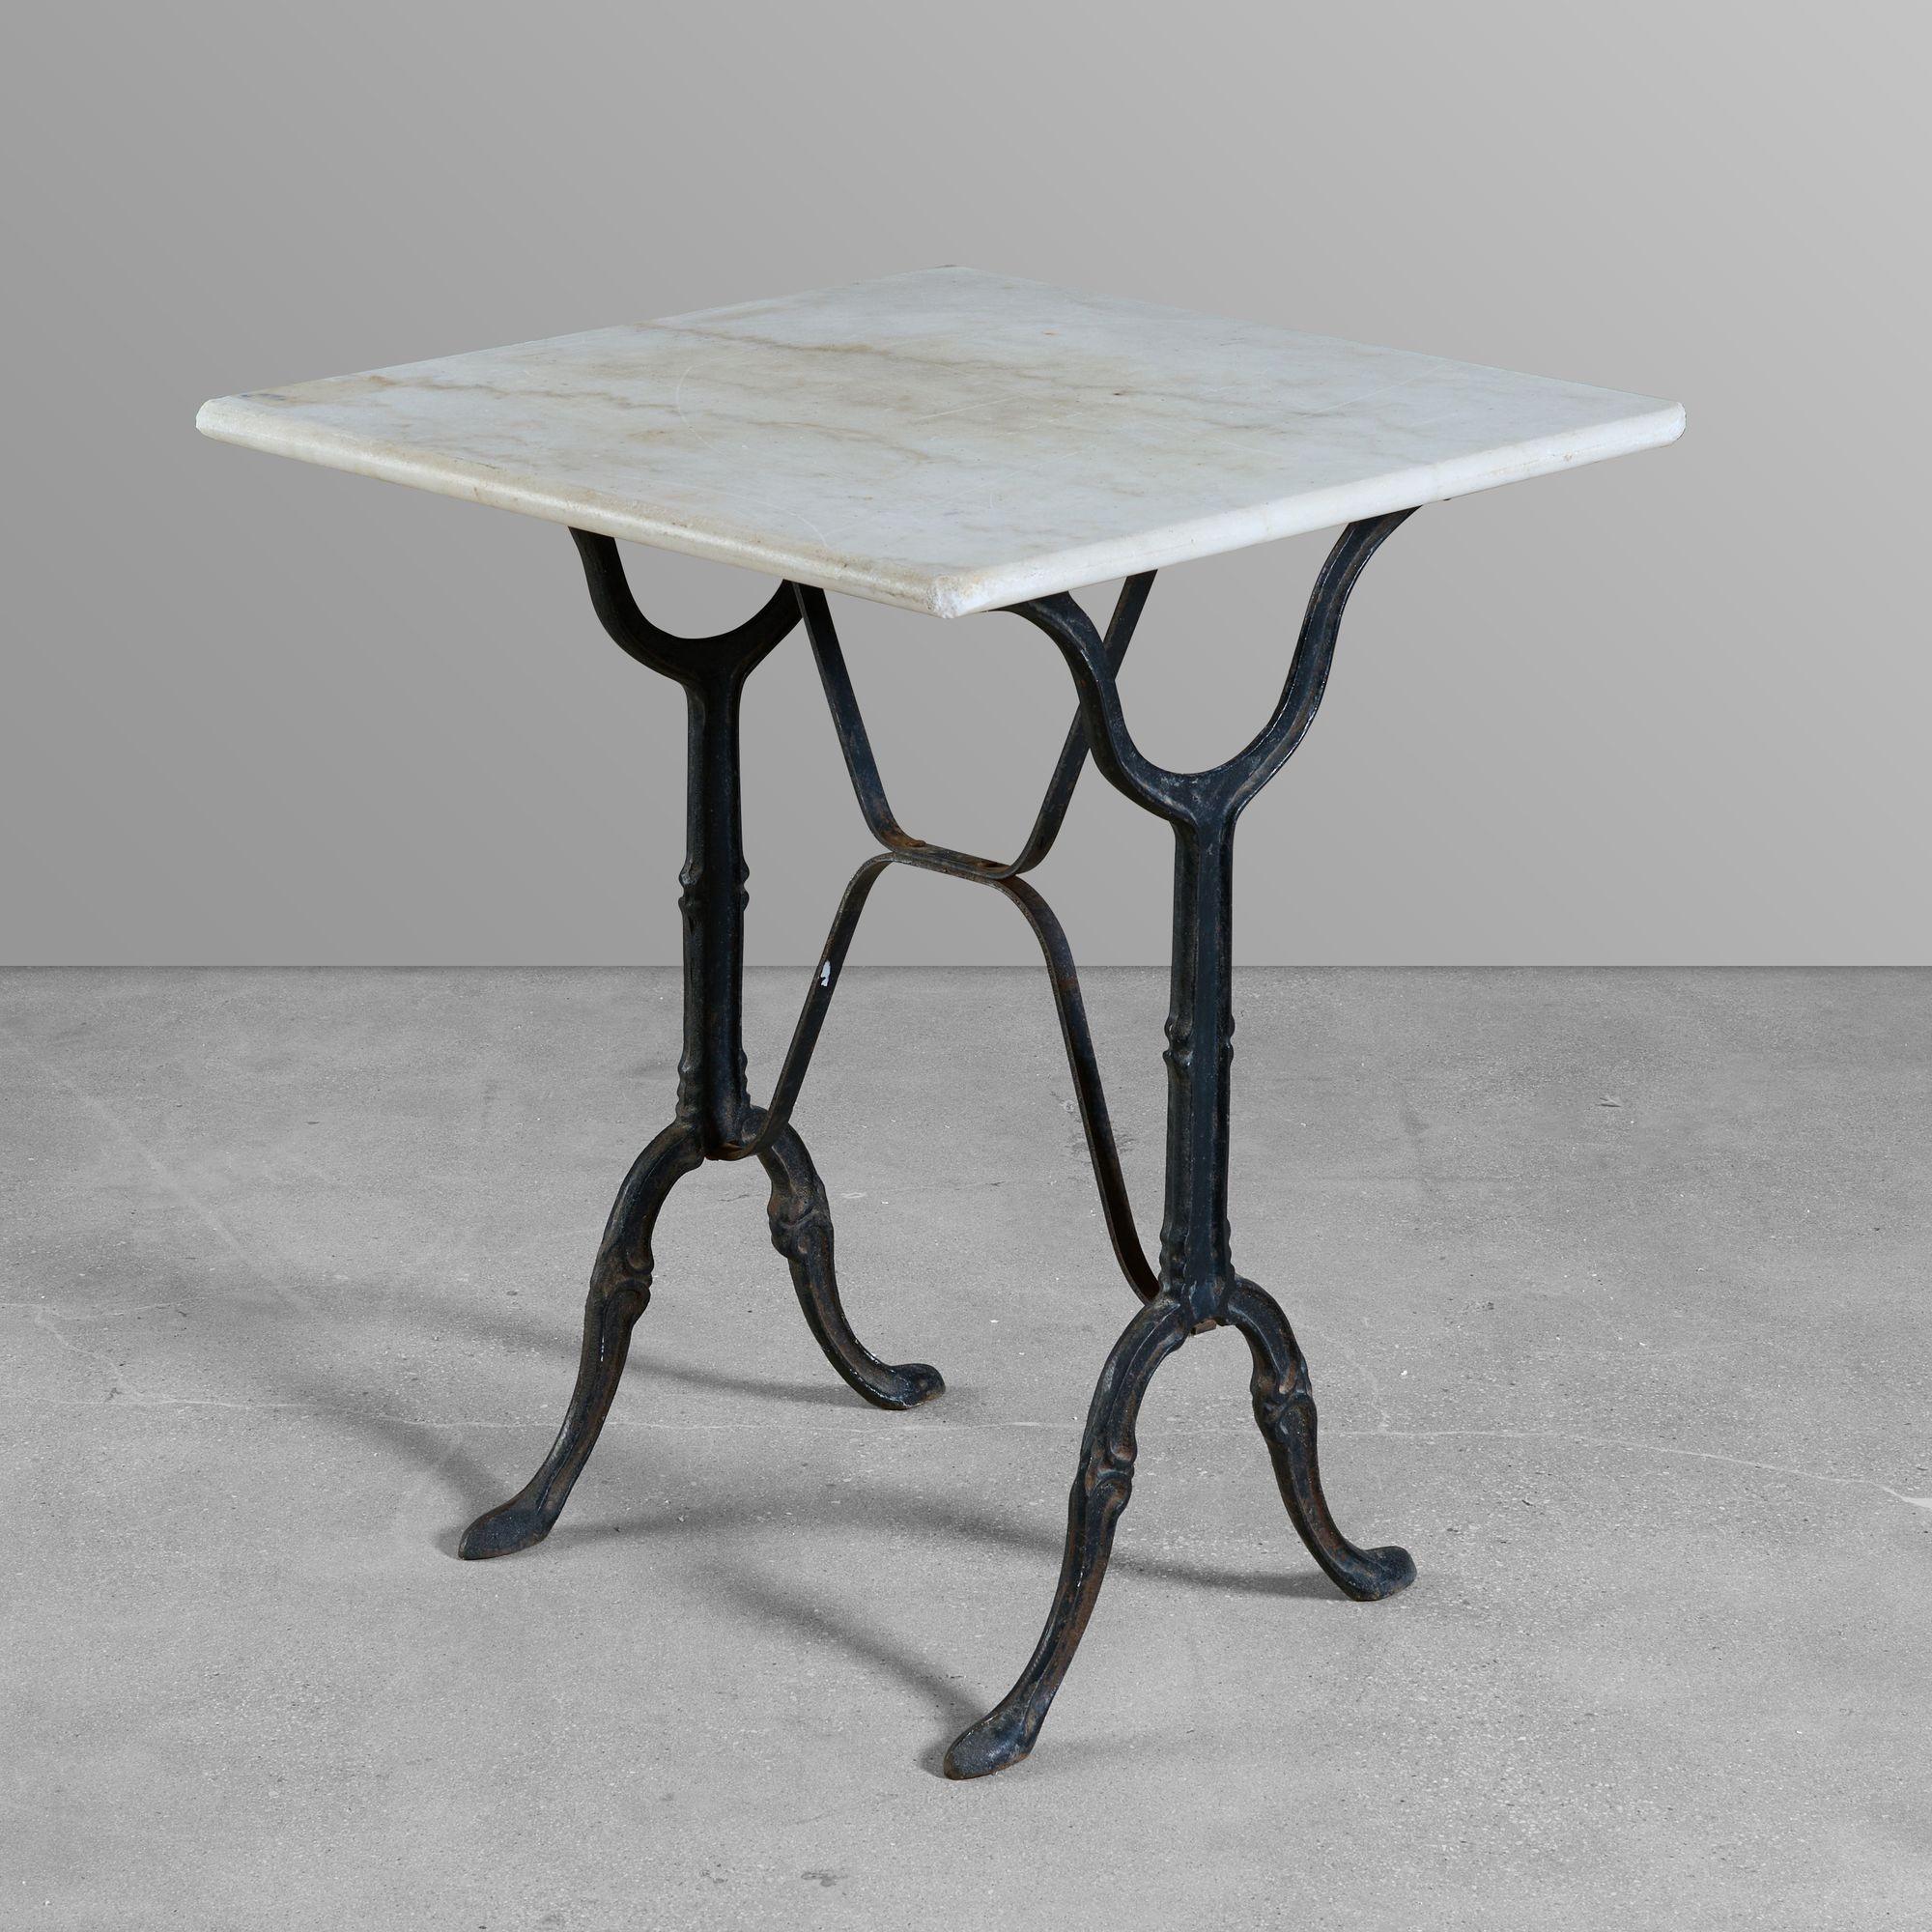 Cast iron cafe table with a marble top.